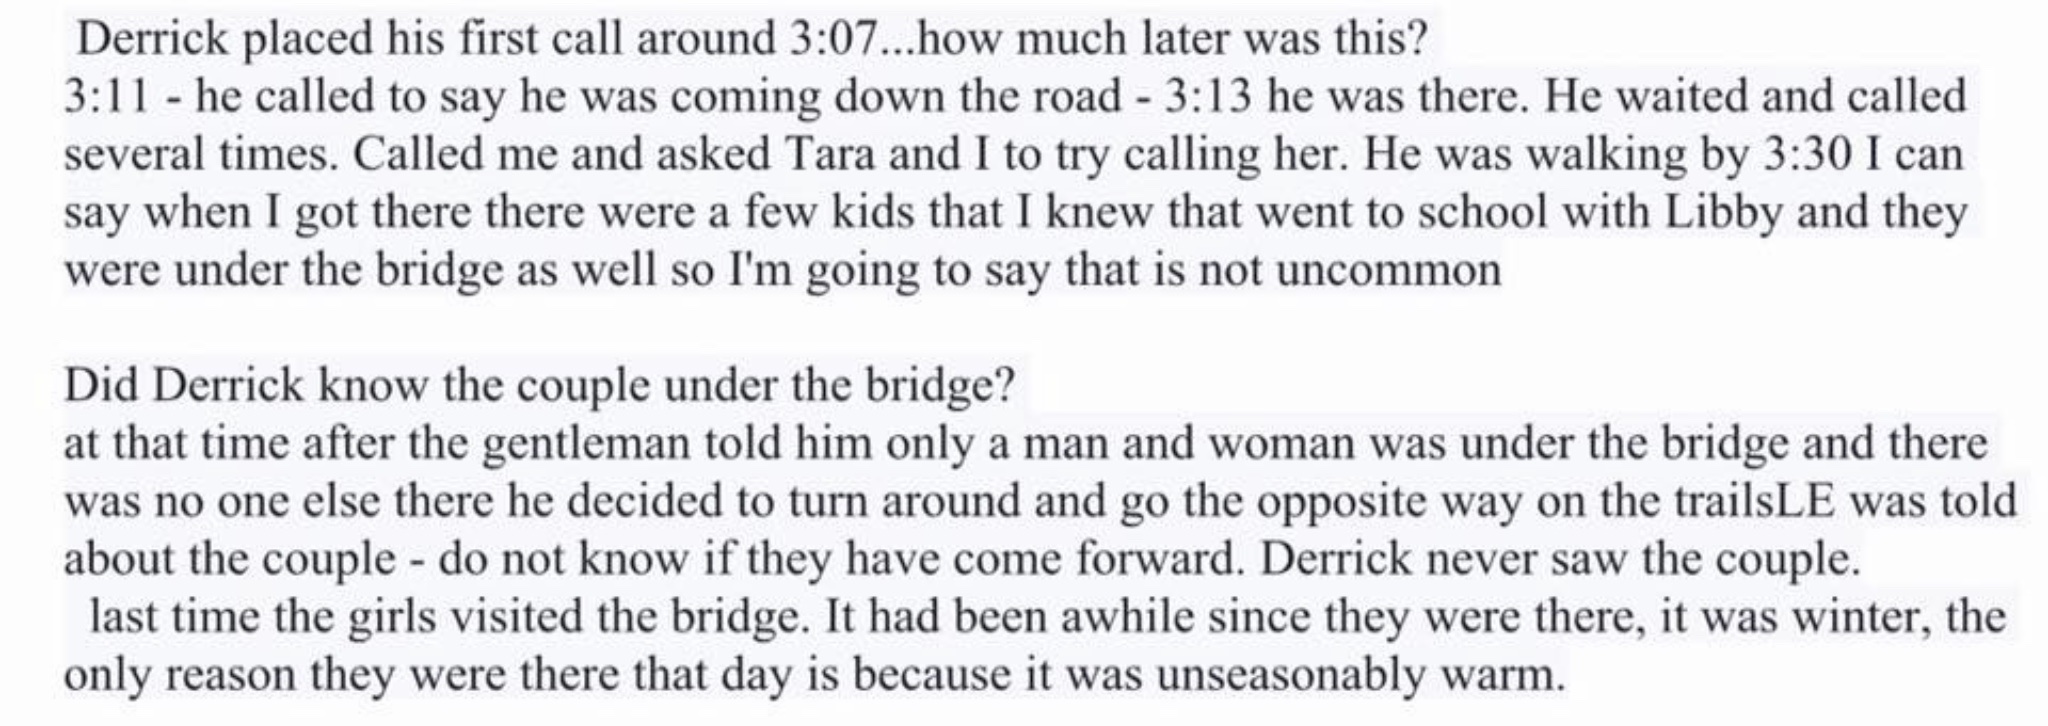 Becky Marchand commenting on Derrick’s arrival 